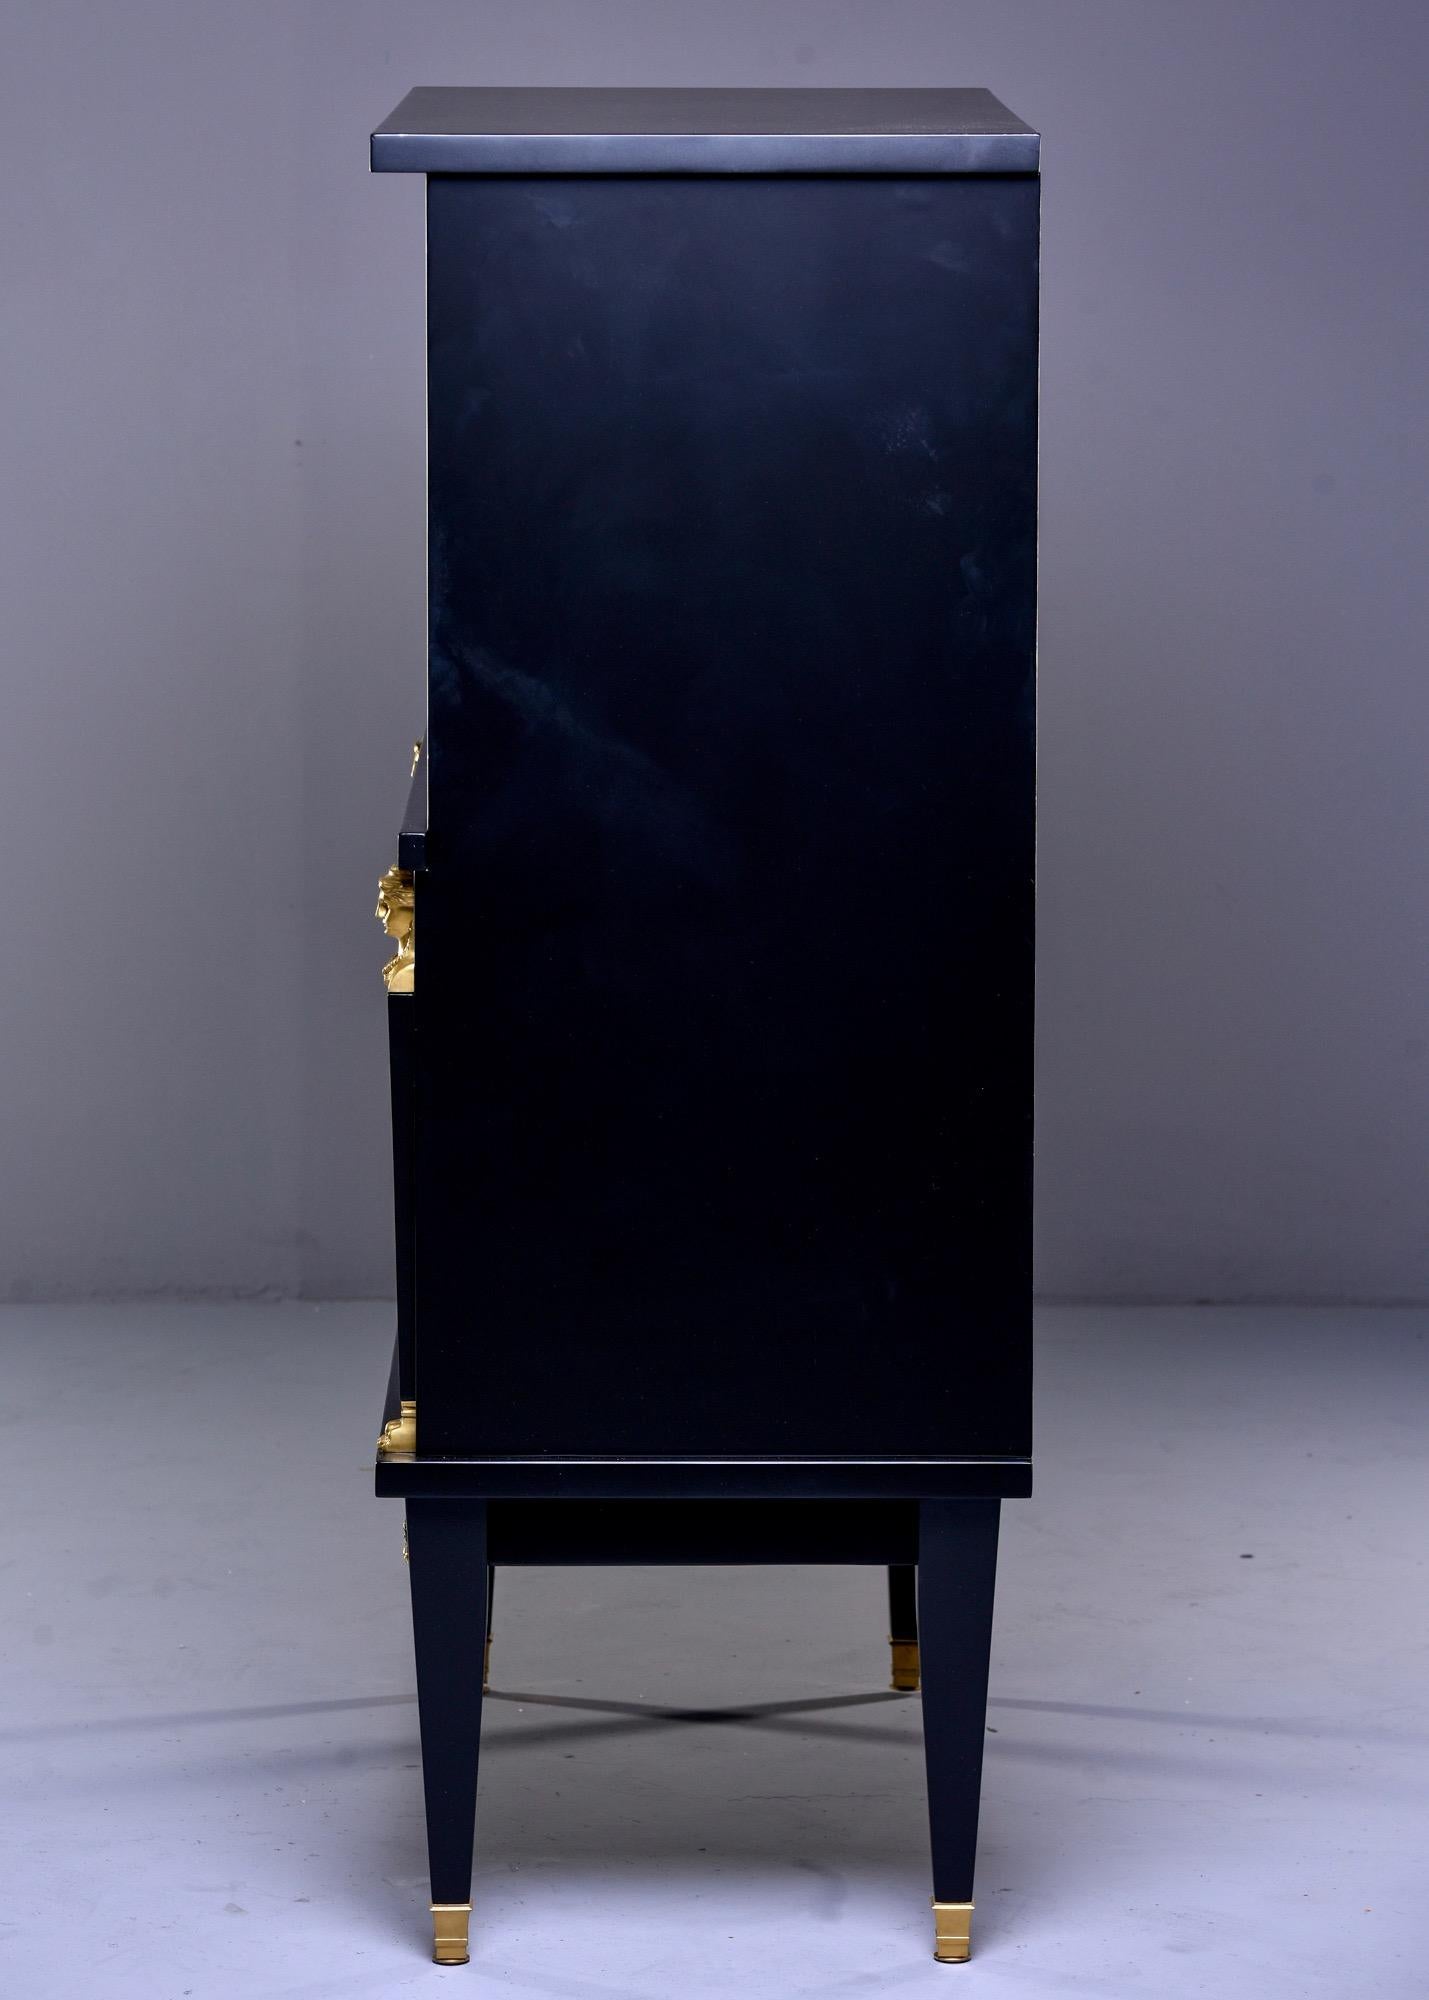 Early 20th Century French Vitrine or Dry Bar with Ebonized Finish and Brass Trim For Sale 1